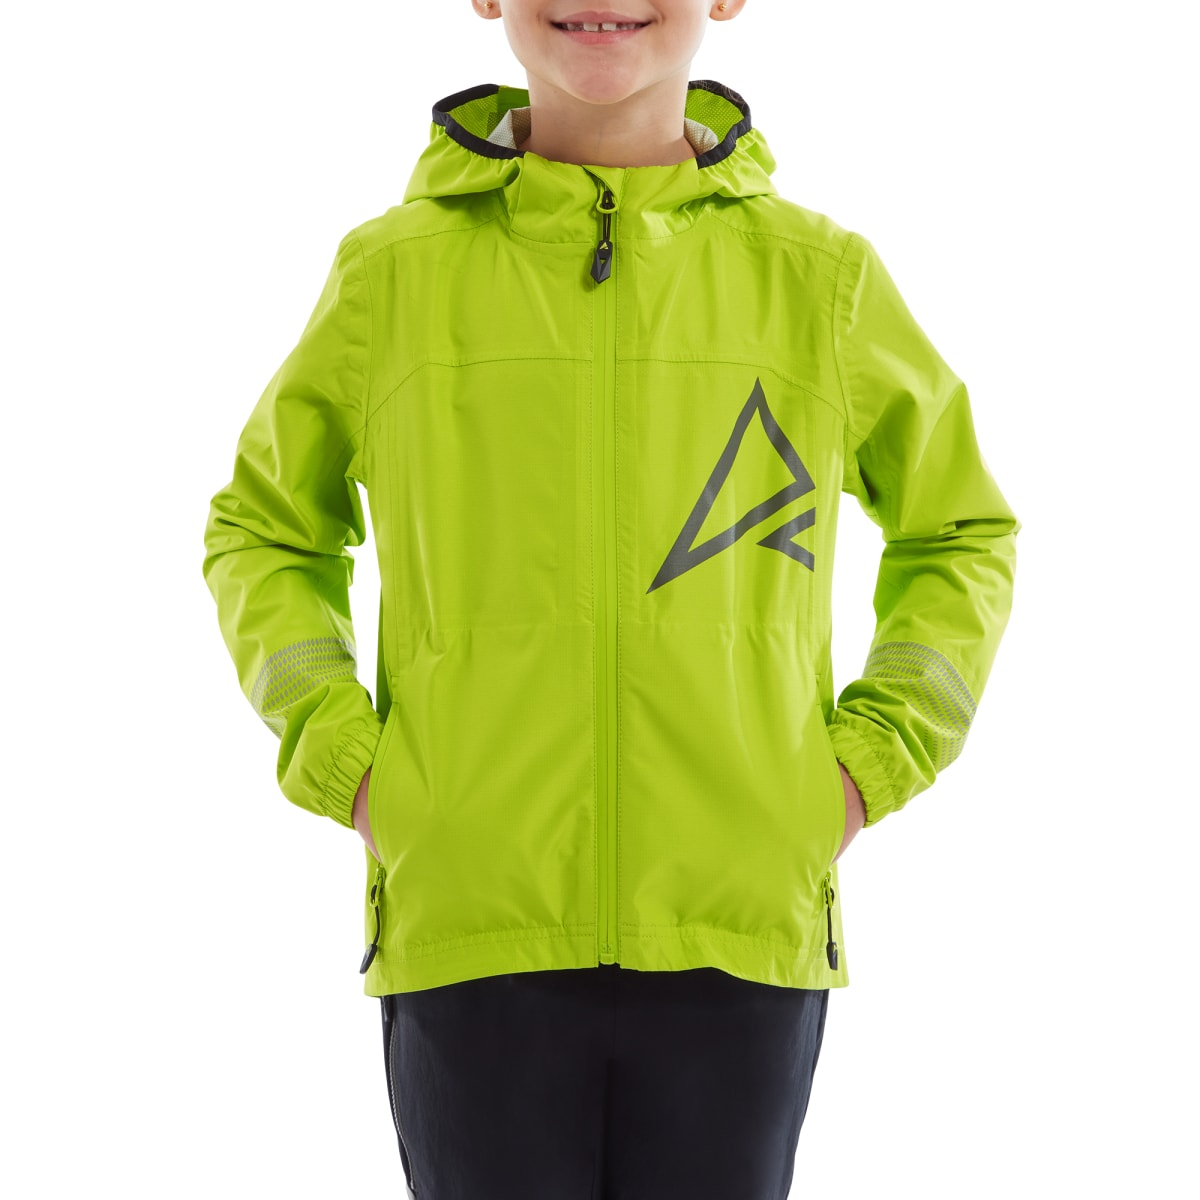 Altura  Spark Kids Waterproof Cycling Jacket 11 to 12 Years LIME